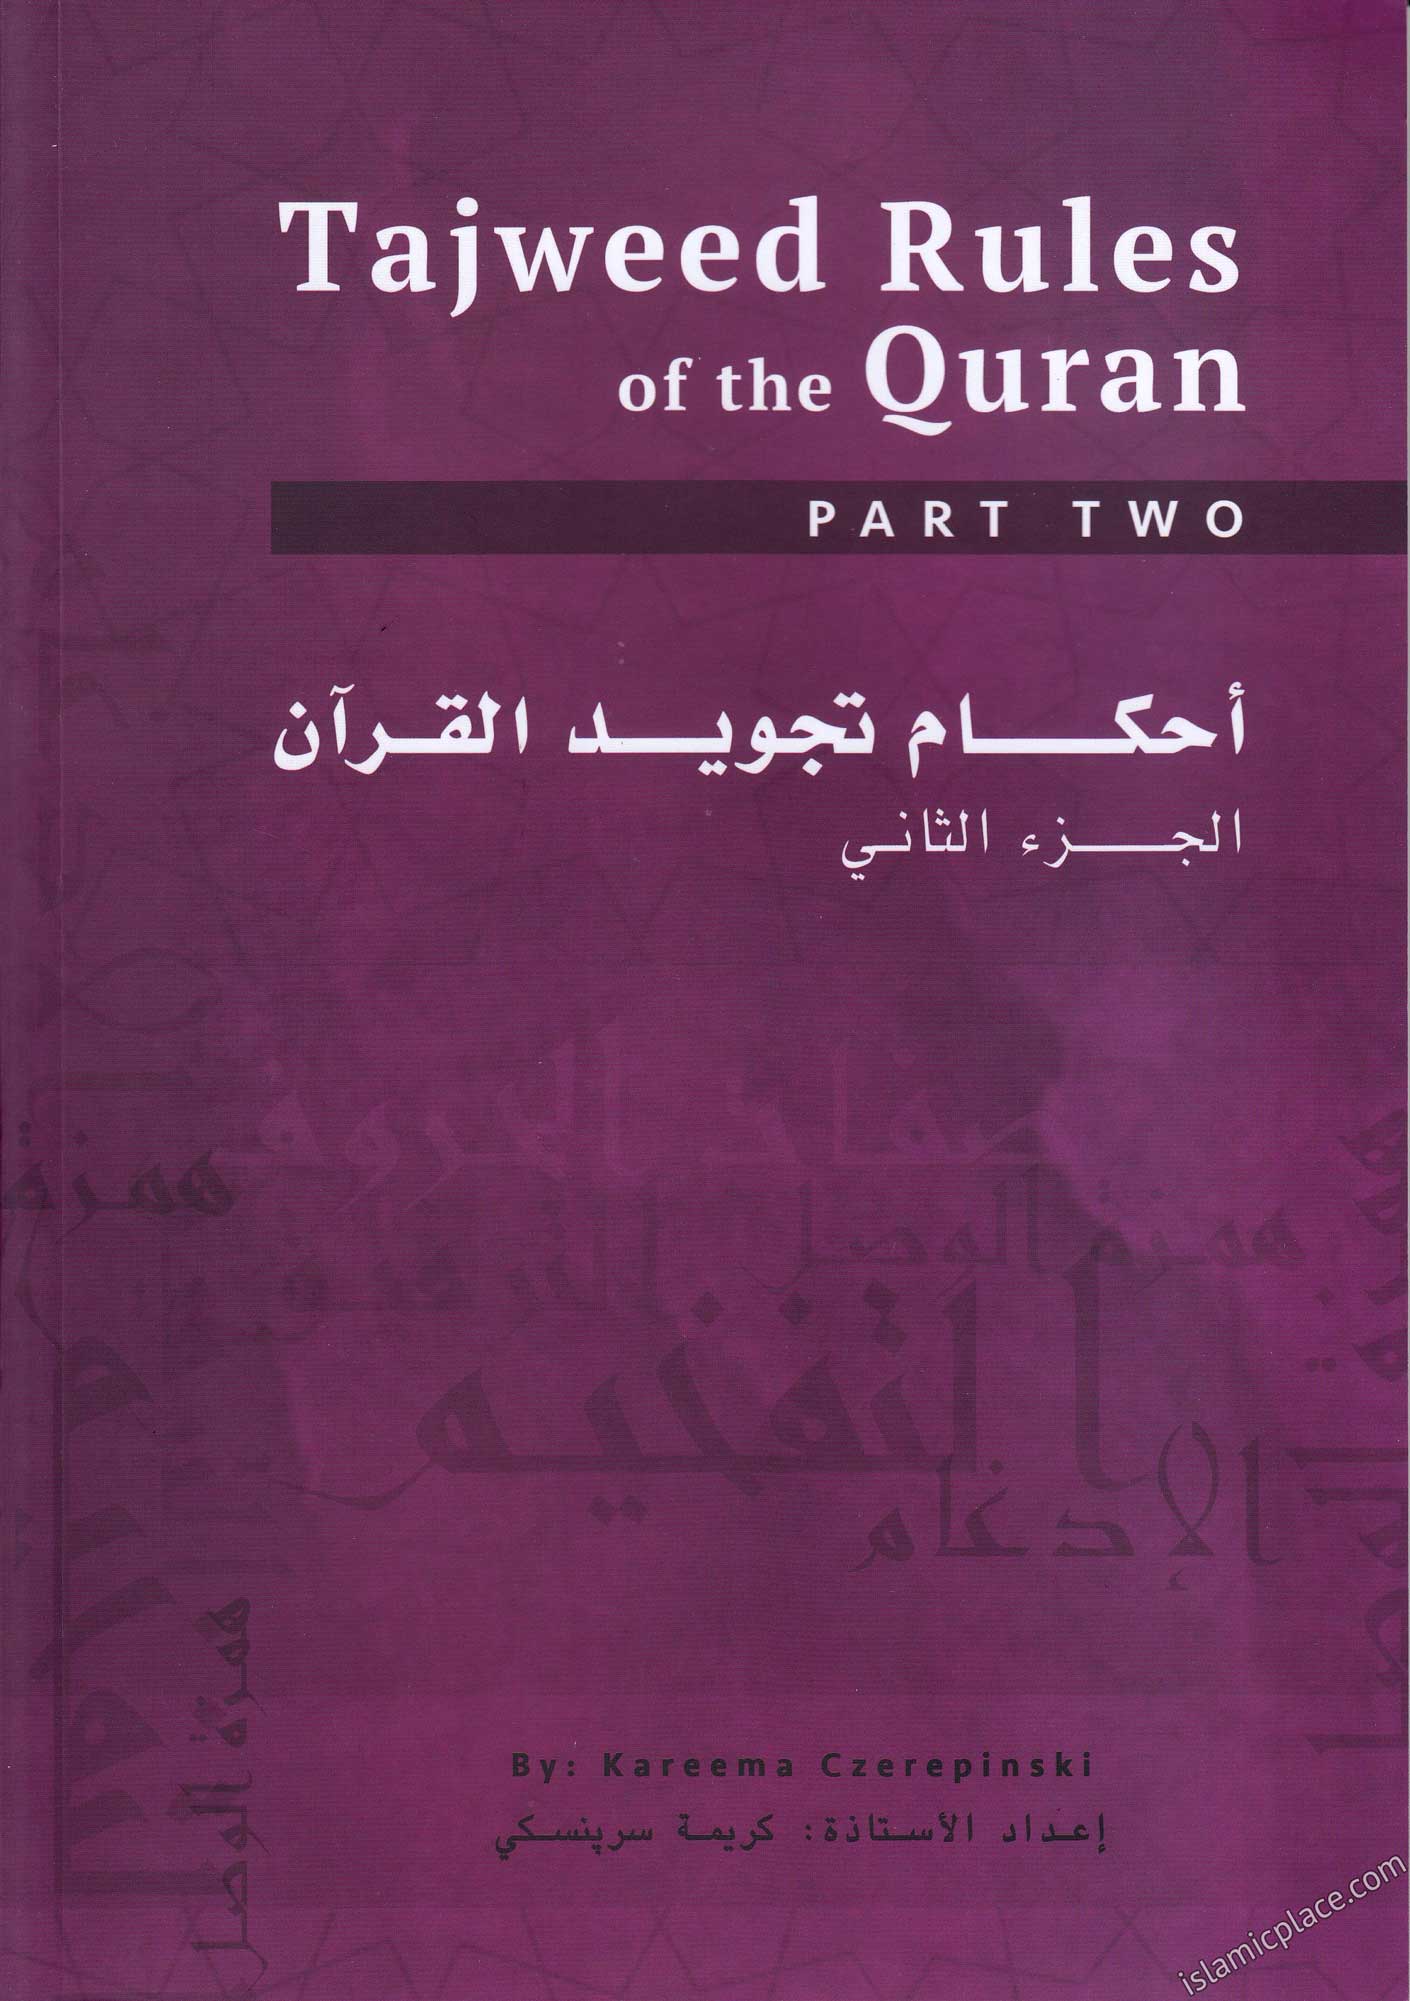 Tajweed Rules of the Qur'an - Part 2